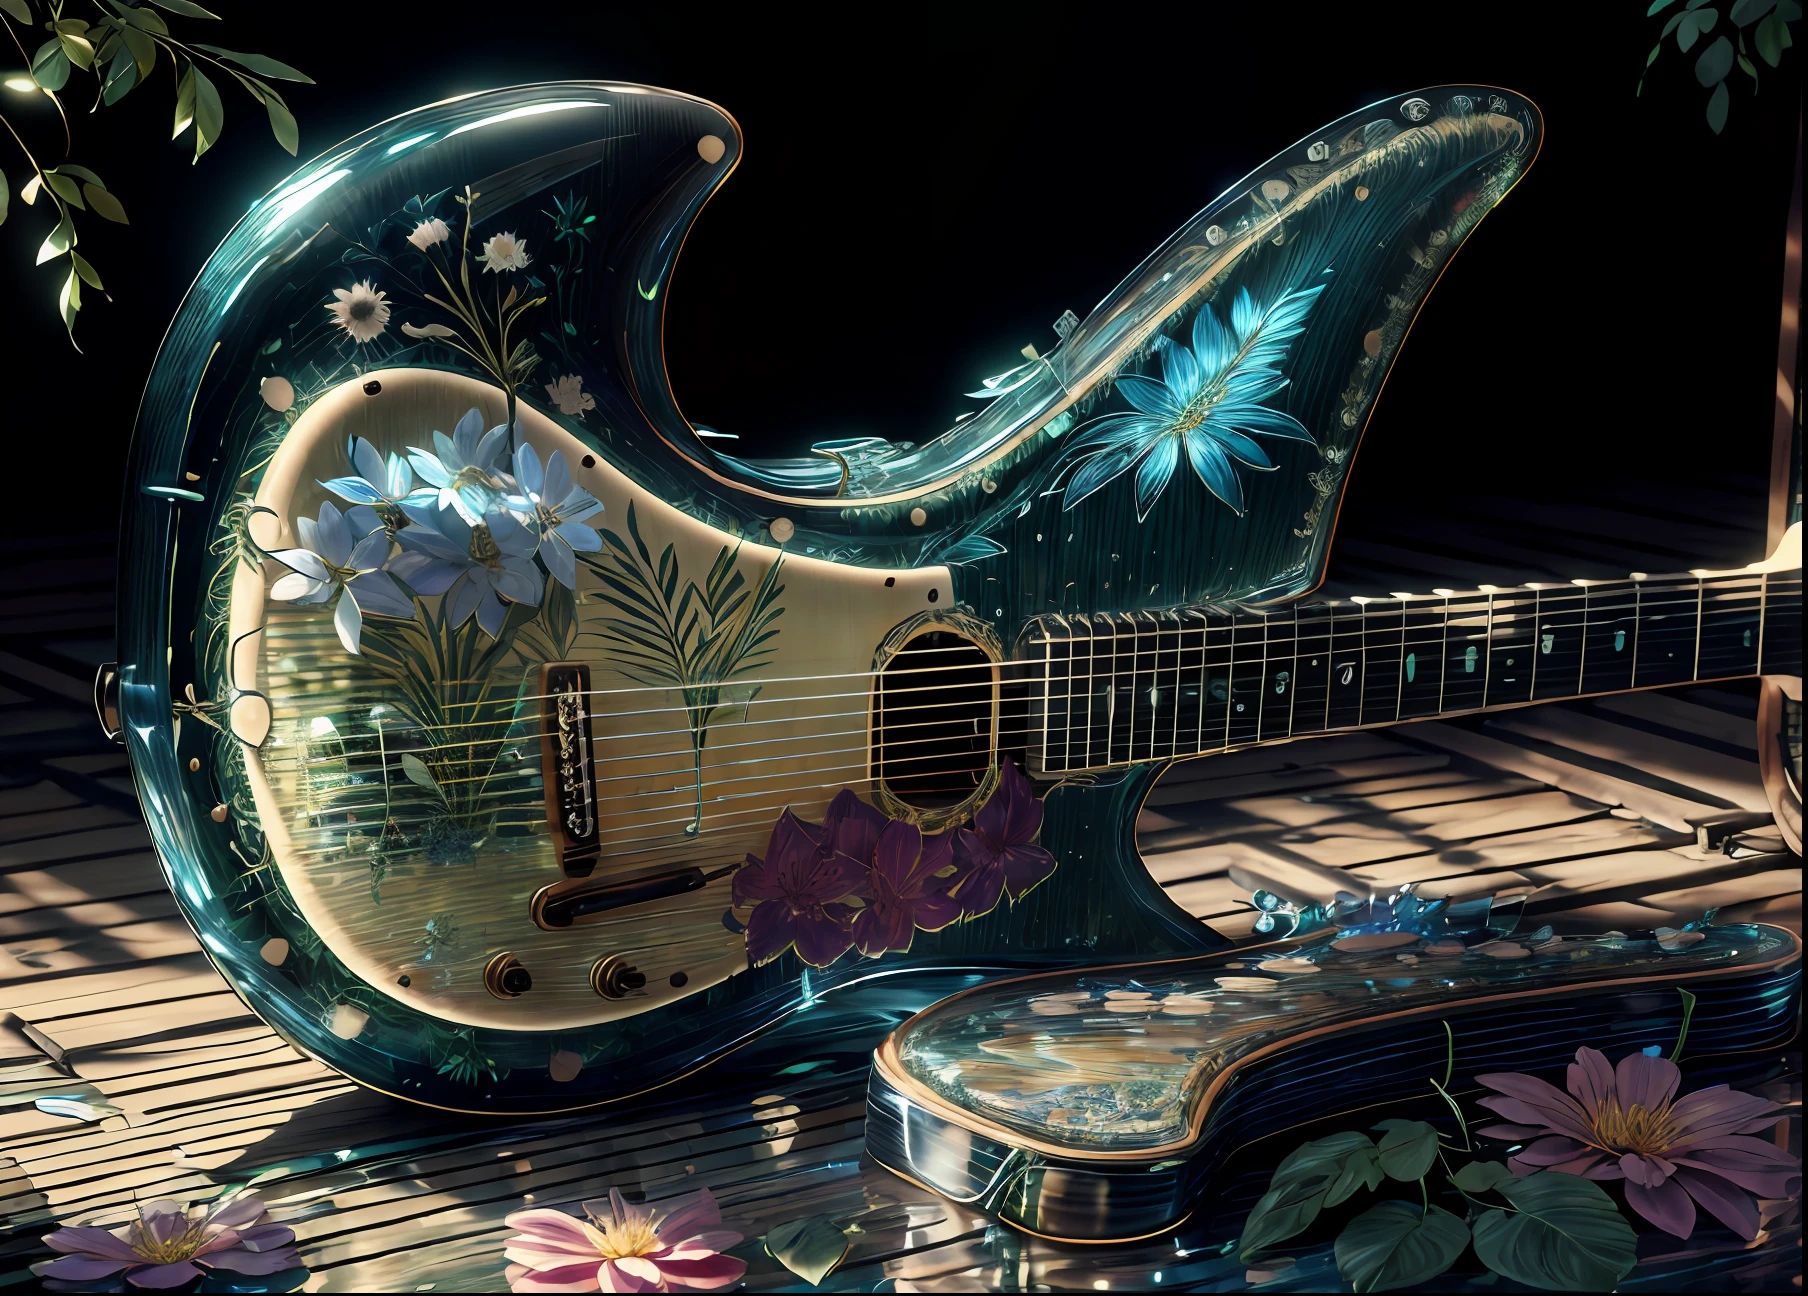 Glass guitar with flowers inside